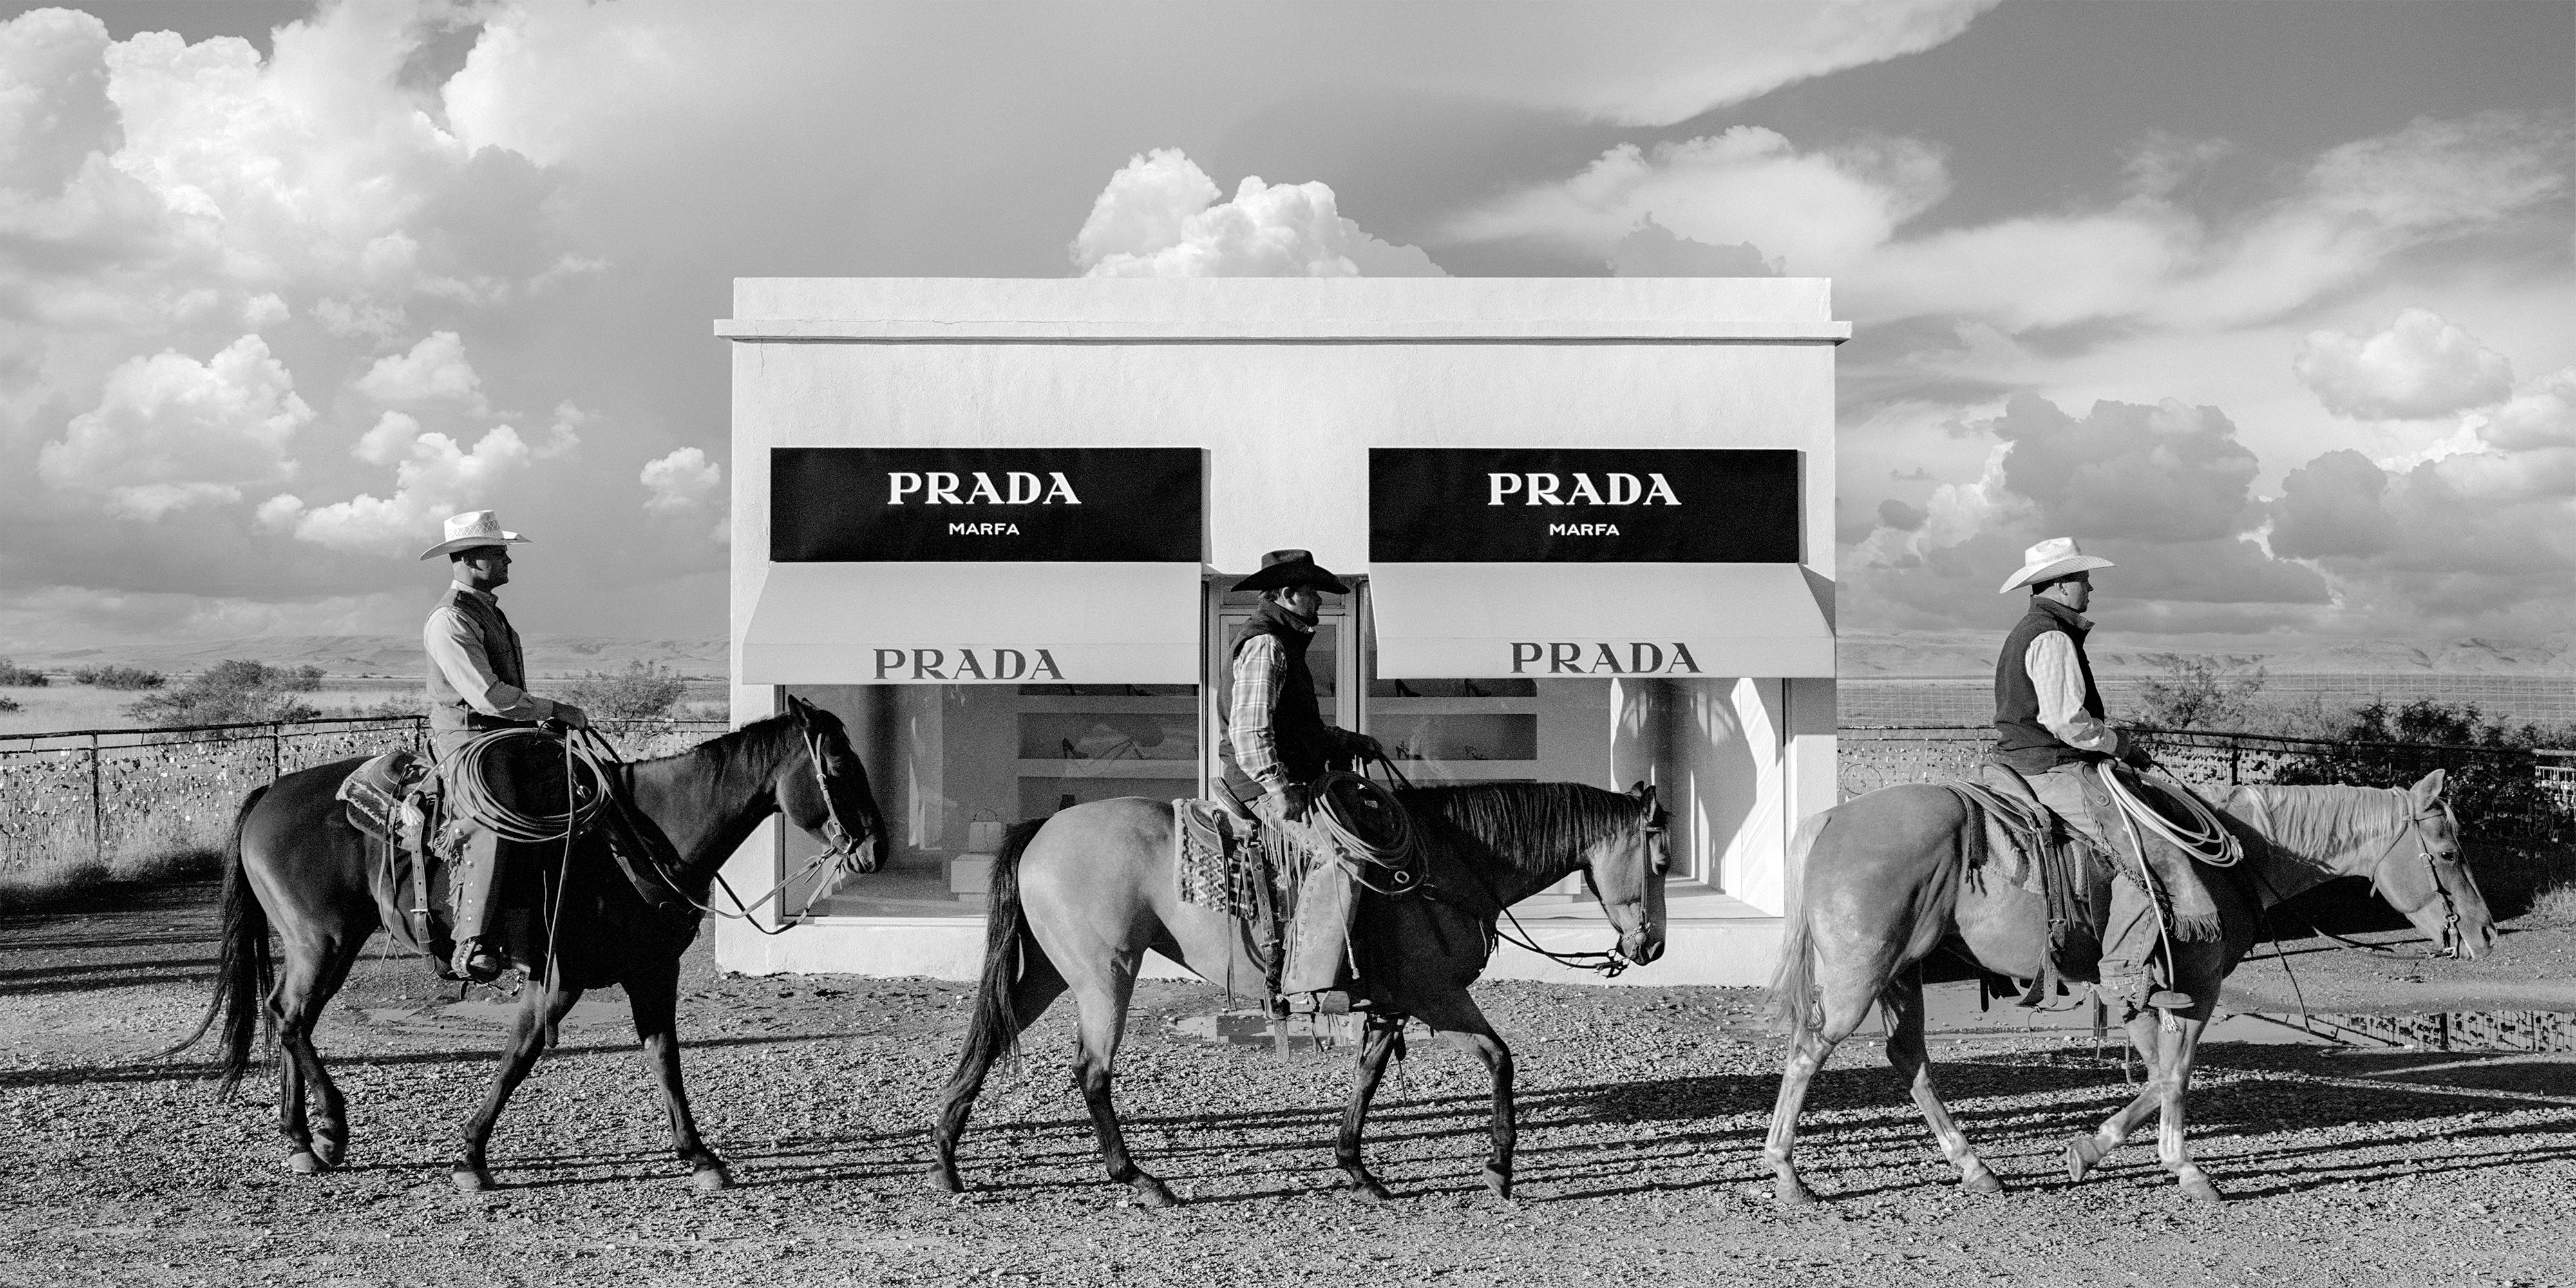 Series: The Western Collection
Archival Pigment Print
All available sizes without frame (with frame):
20" x 40"  (27" x 47")
30" x 60"  (37" x 67")
40" x 80"  (47" x 87")
Edition of 10 + 2 Artist Proof Total Across All Sizes

The cowboy and western